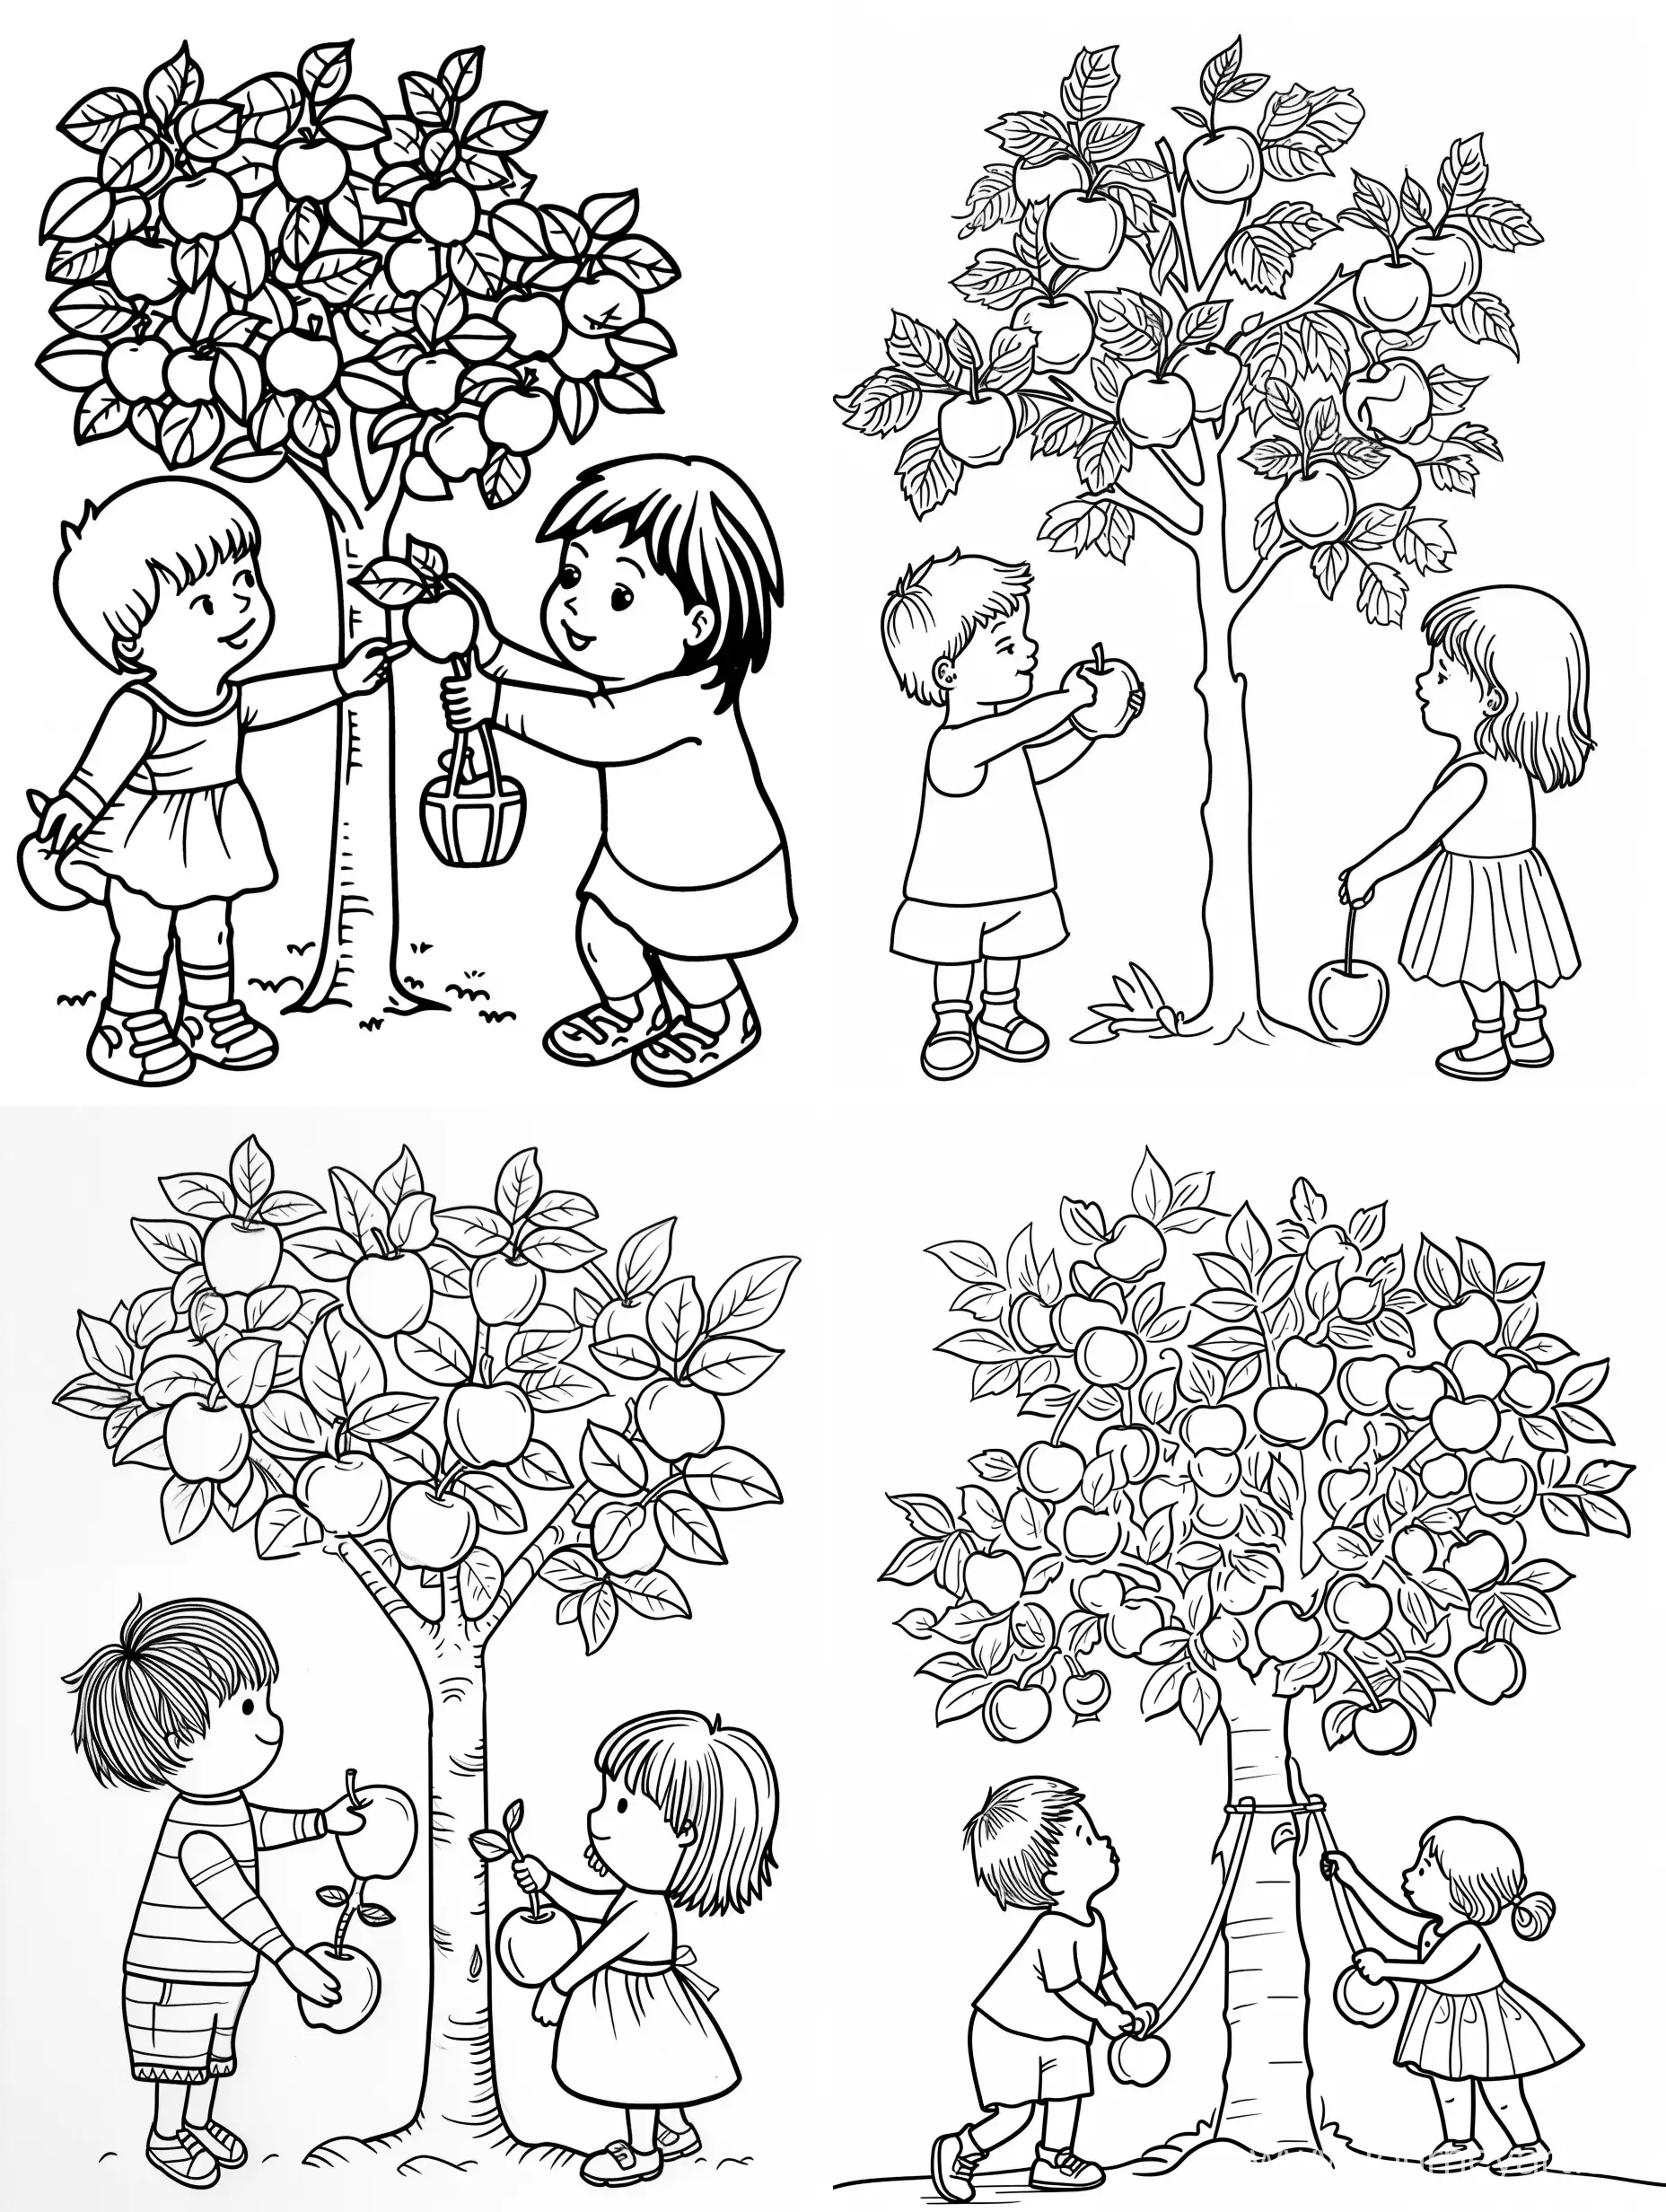 Make very simple outline drawing of little Boy and little girl picking apples from apple tree